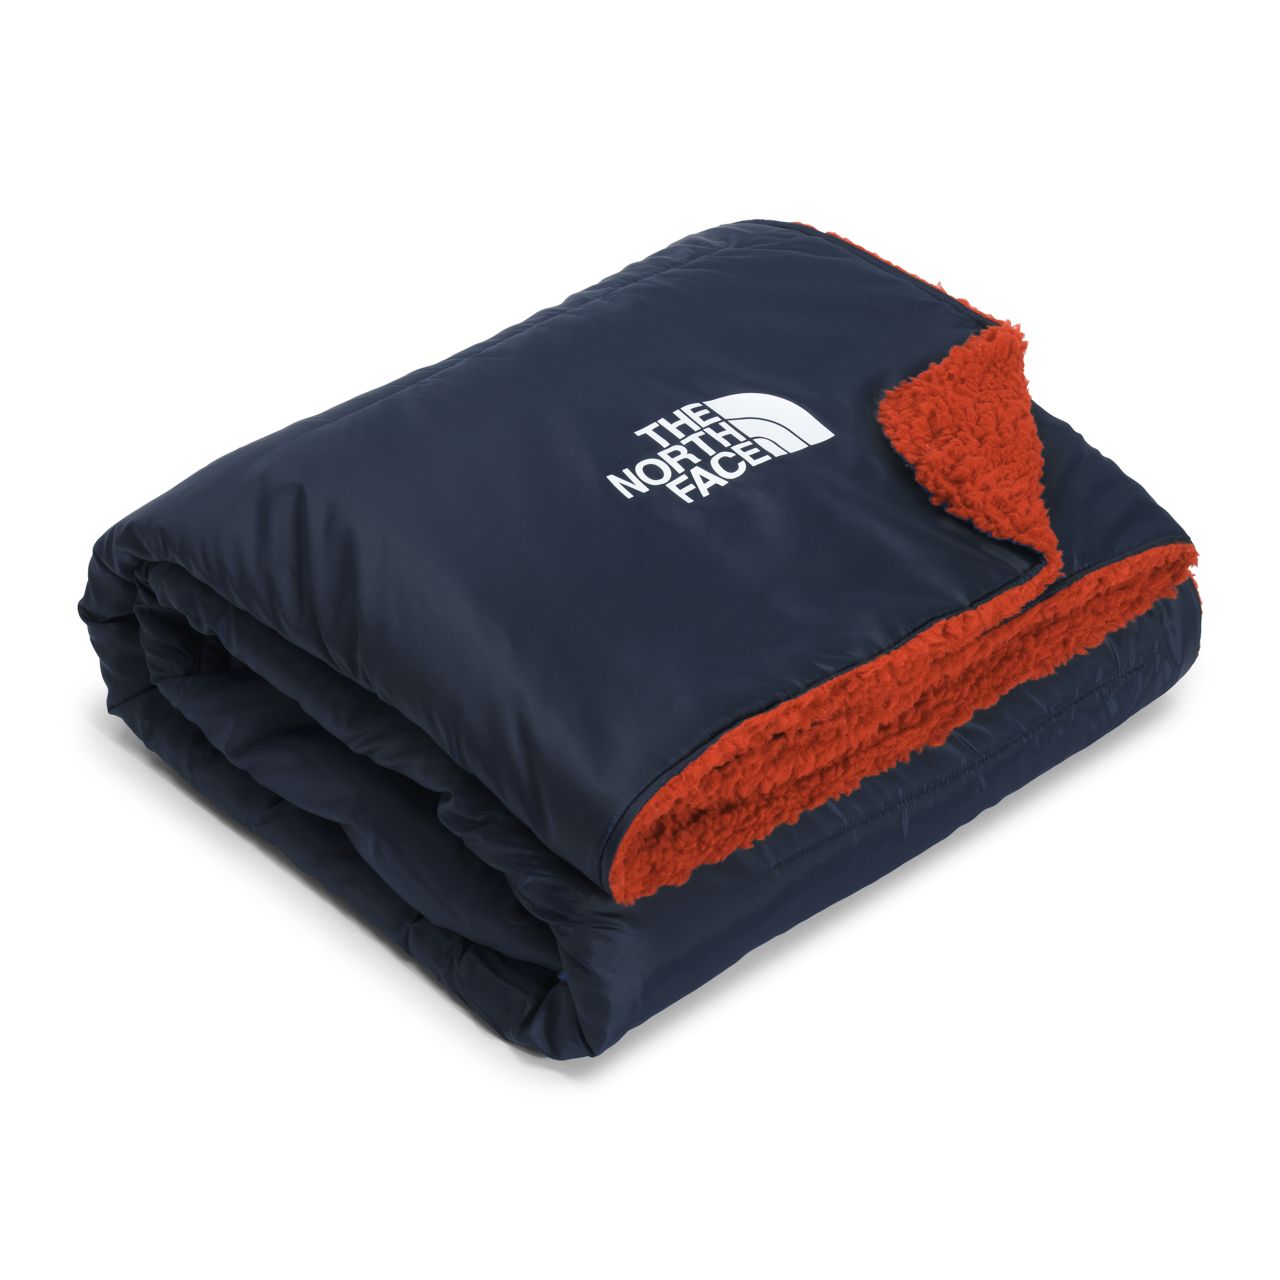 The North Face Wawona Fuzzy Blanket | Outdoor Poncho Blanket